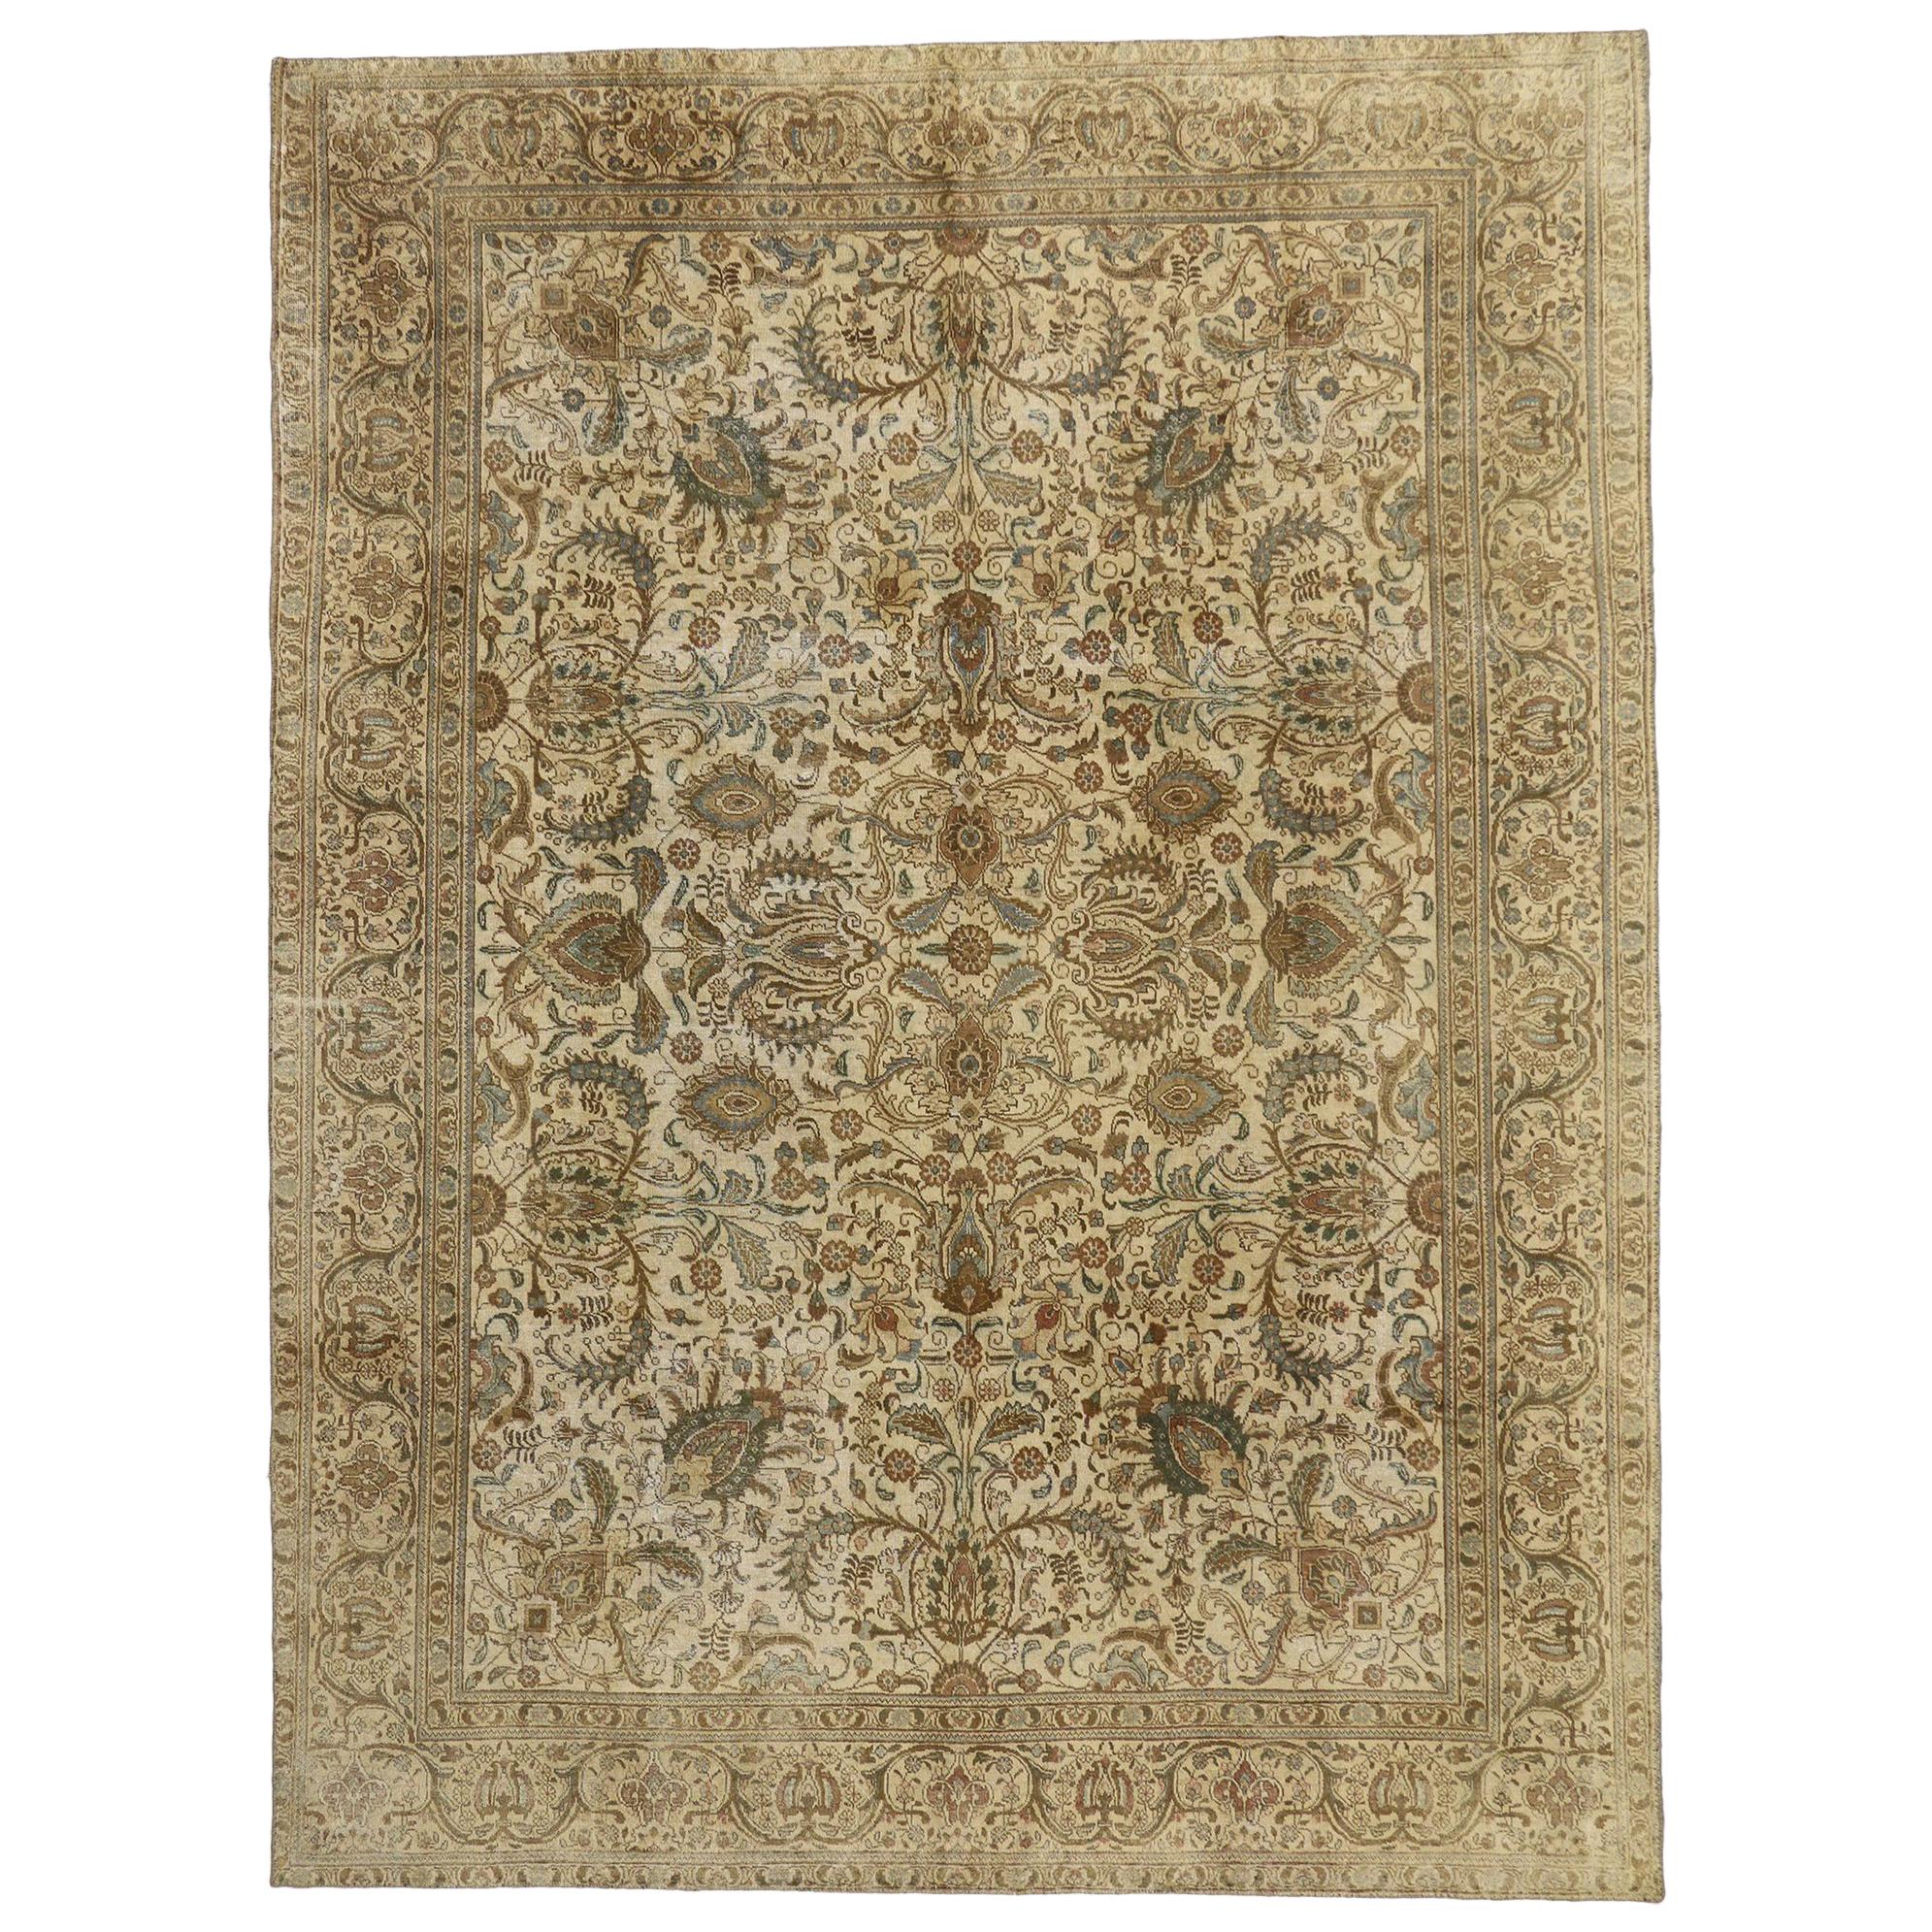 Distressed Vintage Tabriz Persian Rug with Warm, Neutral Colors